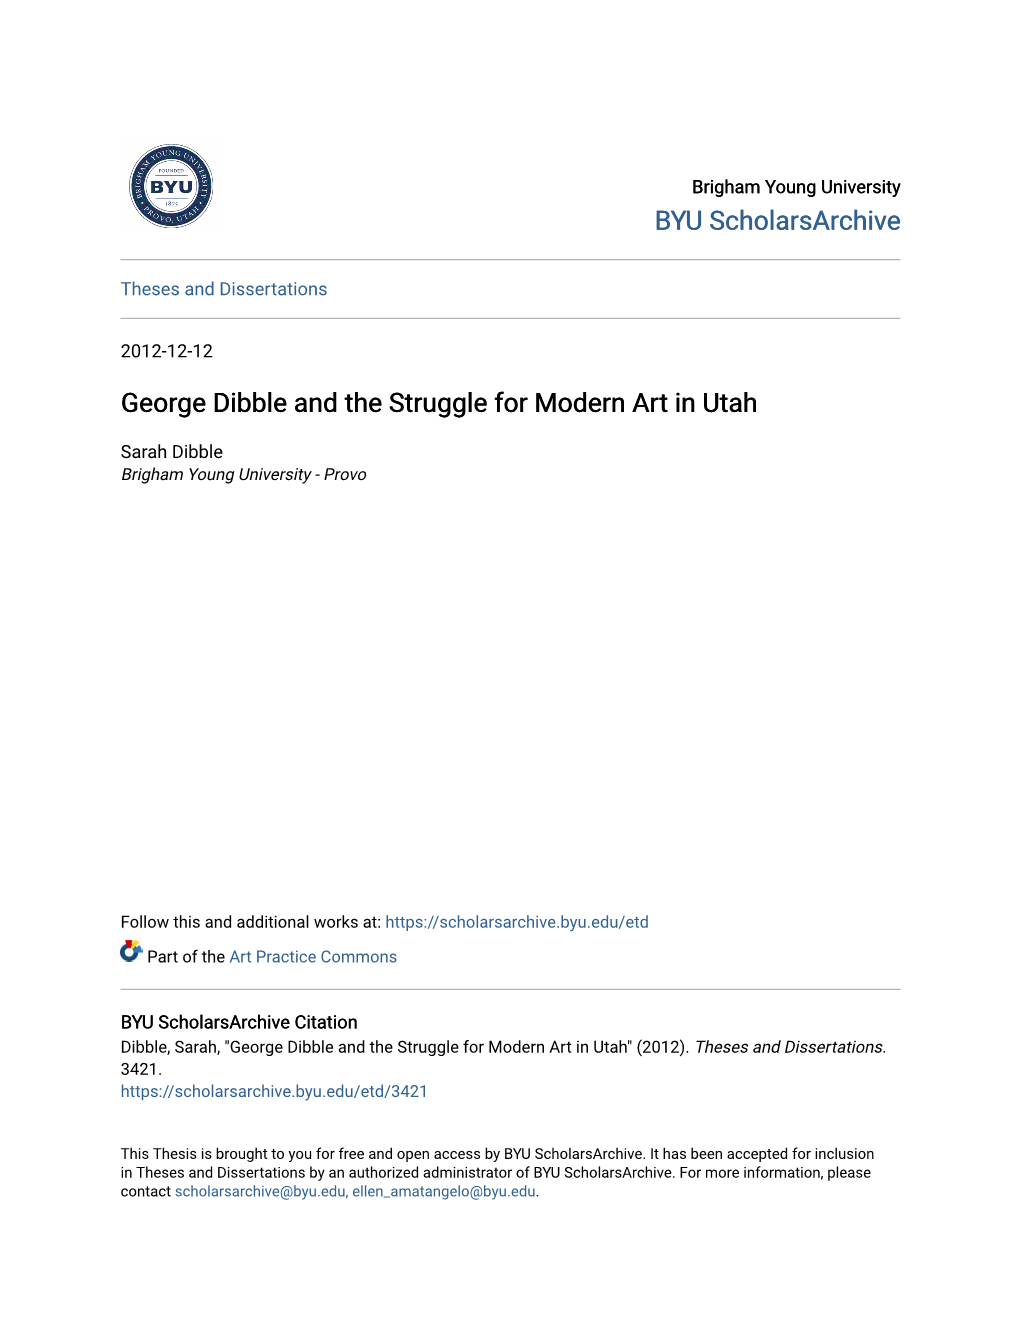 George Dibble and the Struggle for Modern Art in Utah